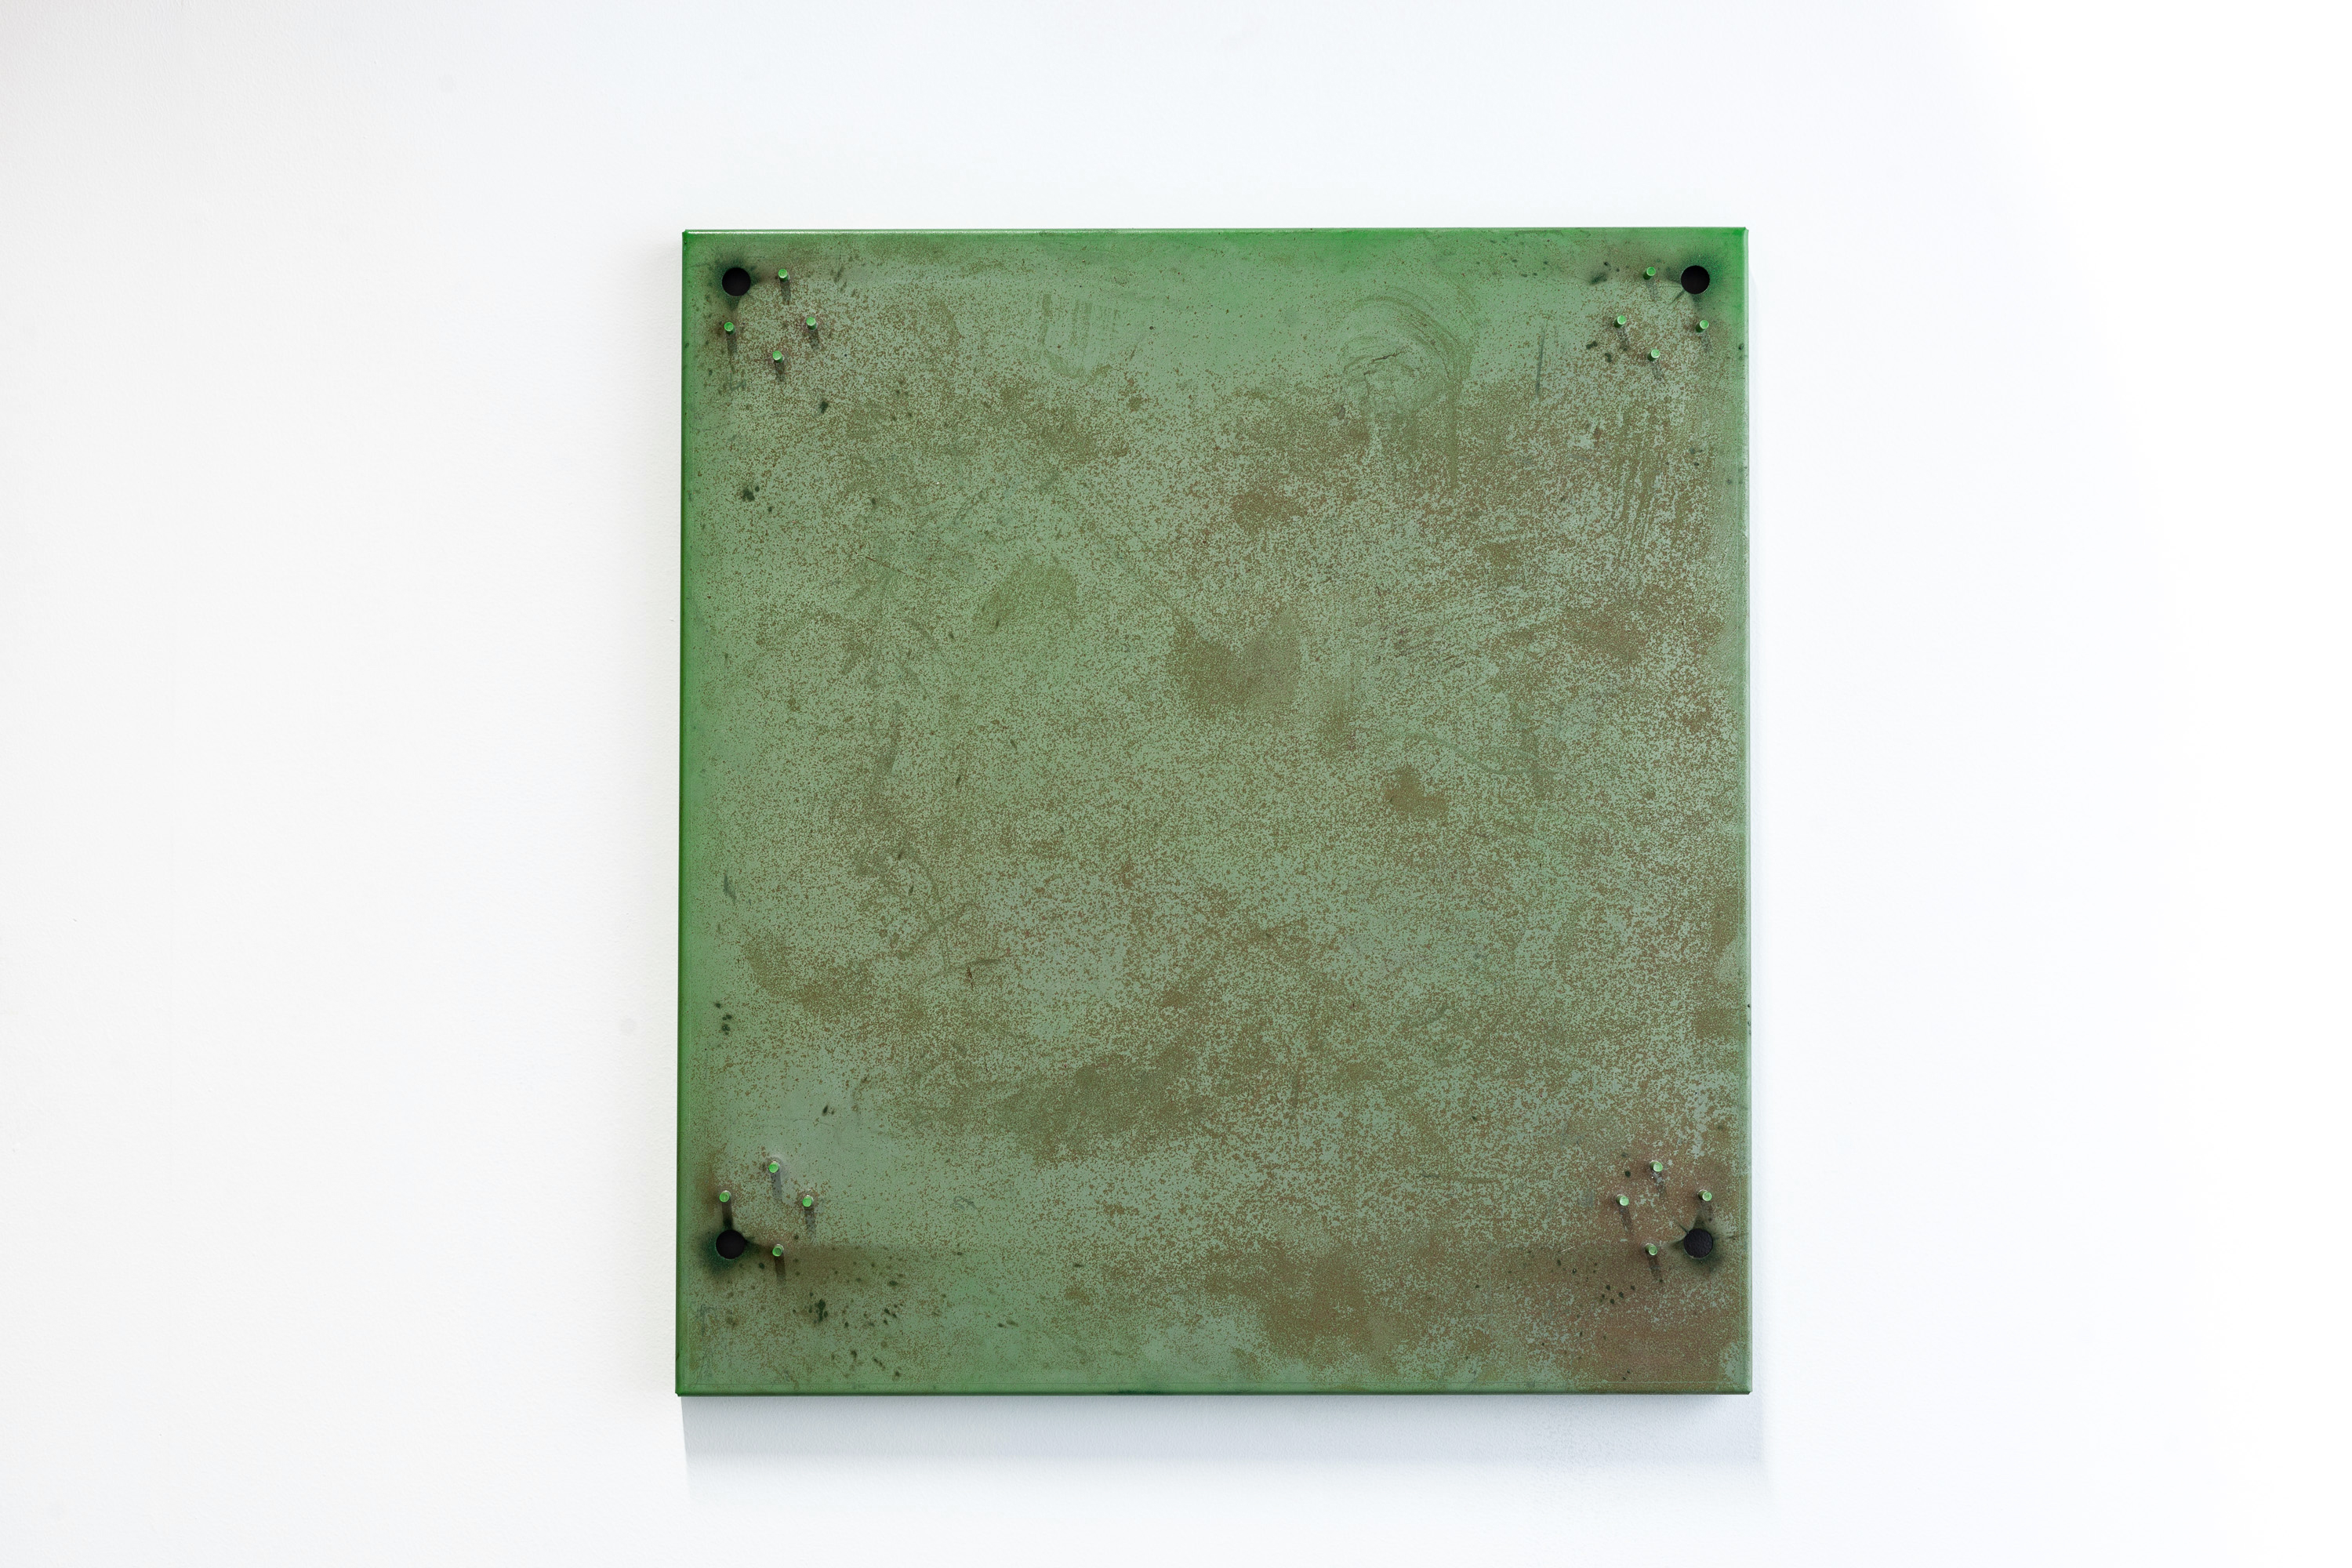 Selected works from the powdered jigs series. An extended portfolio of these works is available on request. <br><br>Green rusting. redundant mild steel fabricators jig and powder coating. 56 x 61 x 4cm. 2022. Photo by John-Paul Brown